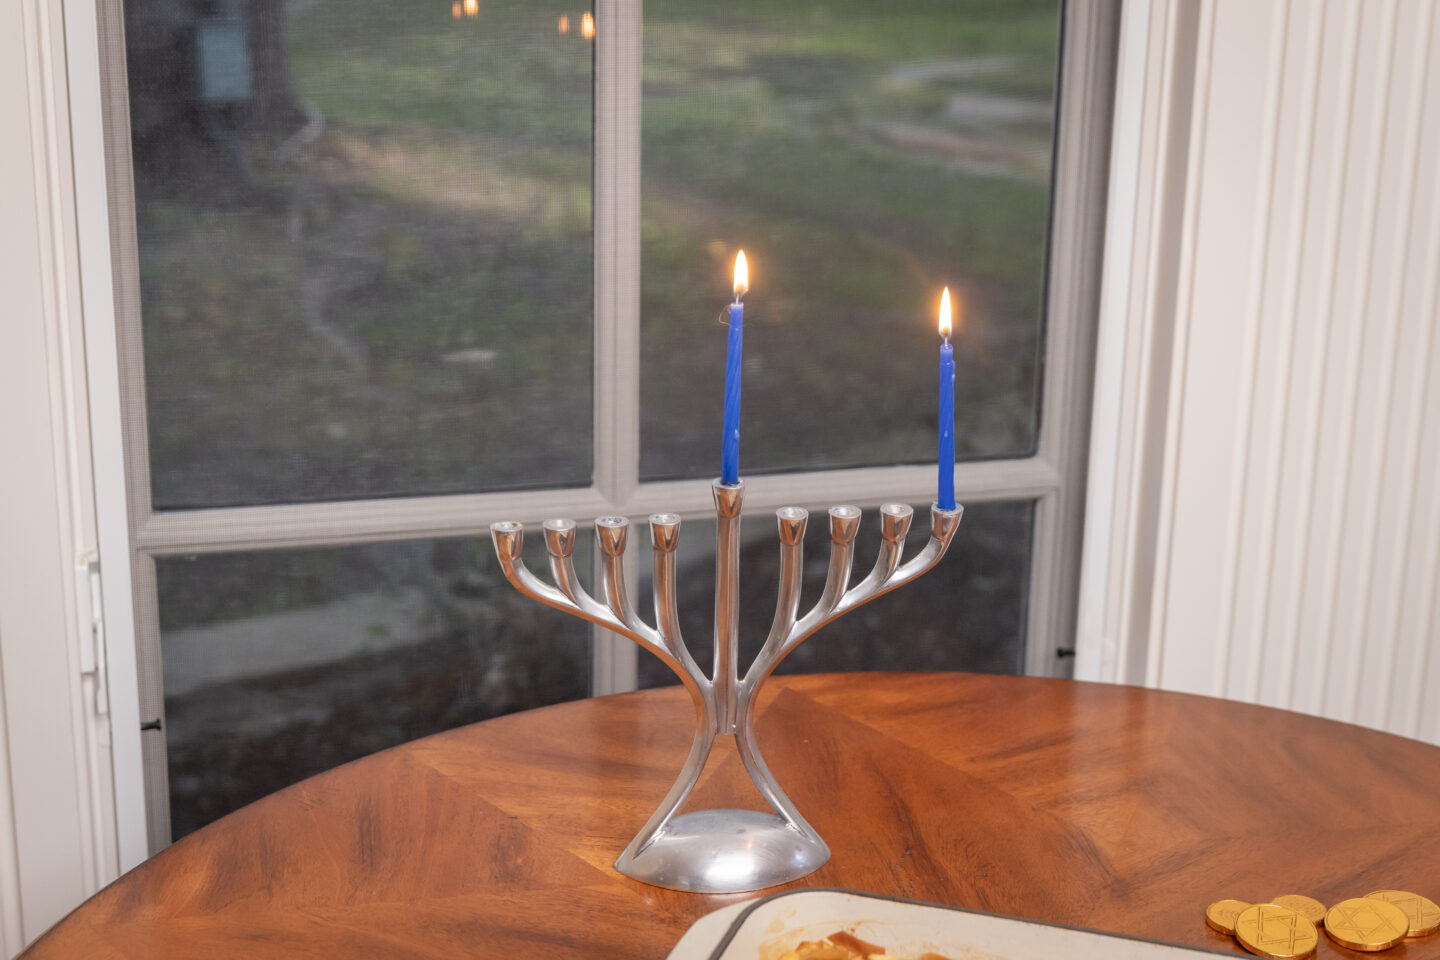 Menorah Lit for the First Night of Chanukah